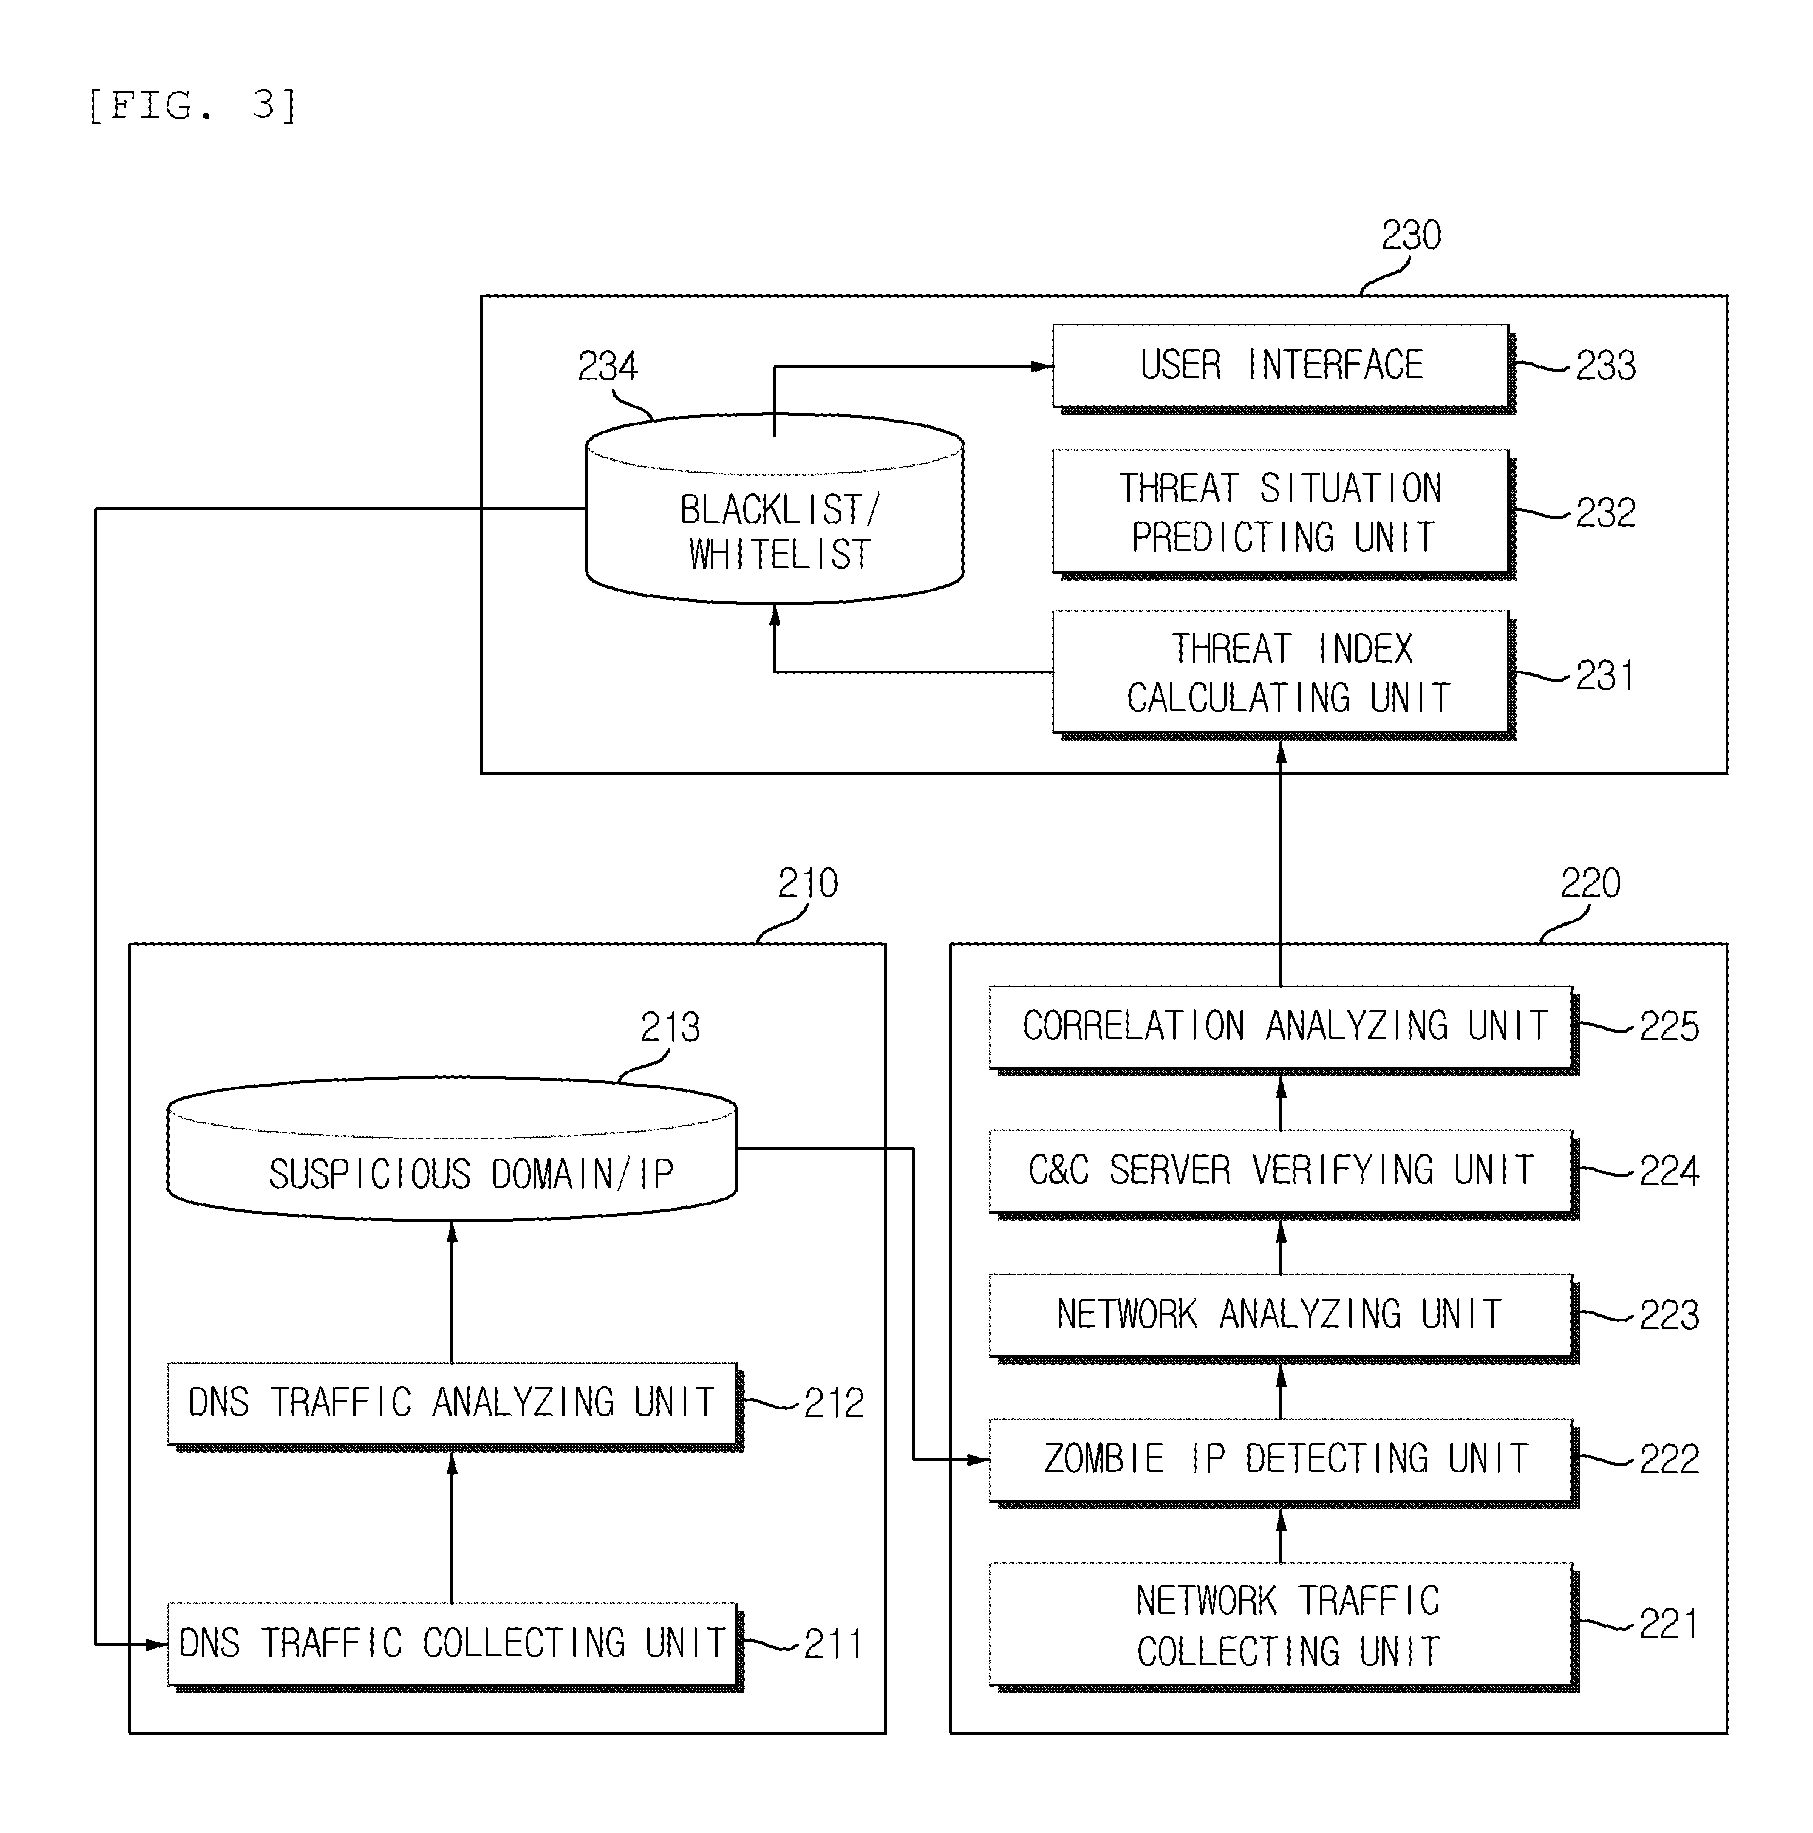 Cyber threat prior prediction apparatus and method